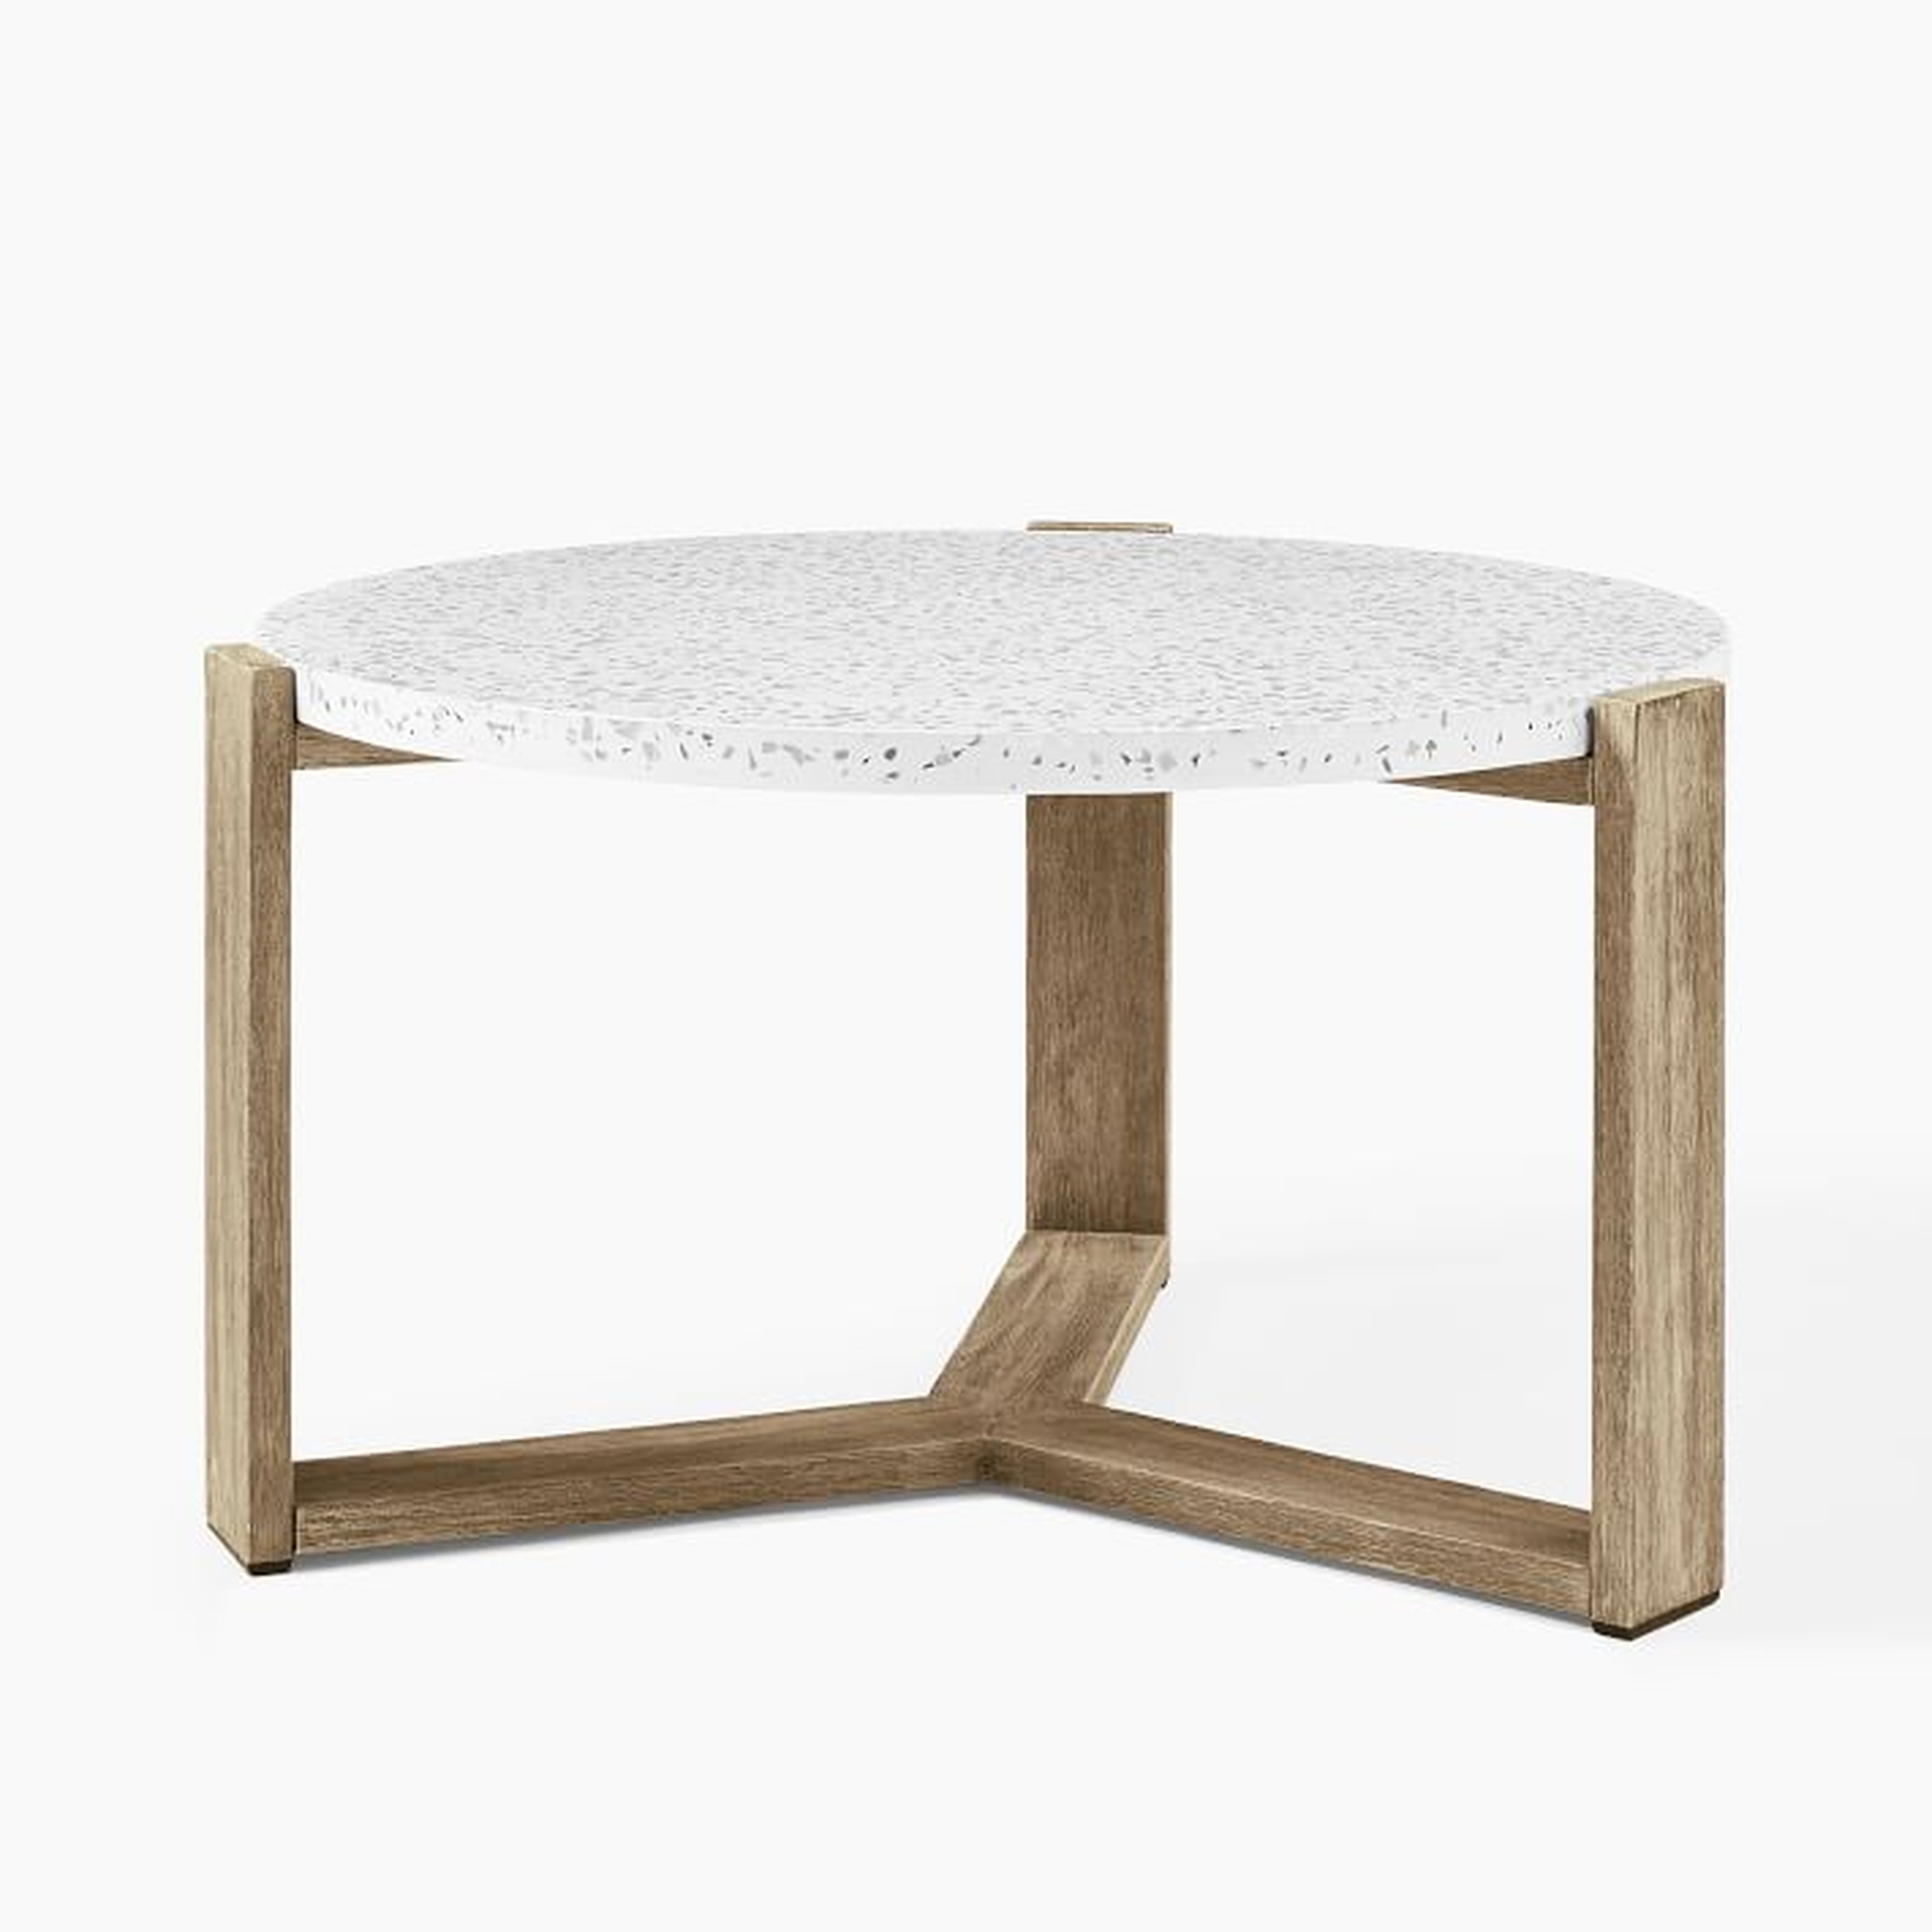 Mosaic Coffee Table - White Marble Top + Driftwood - West Elm